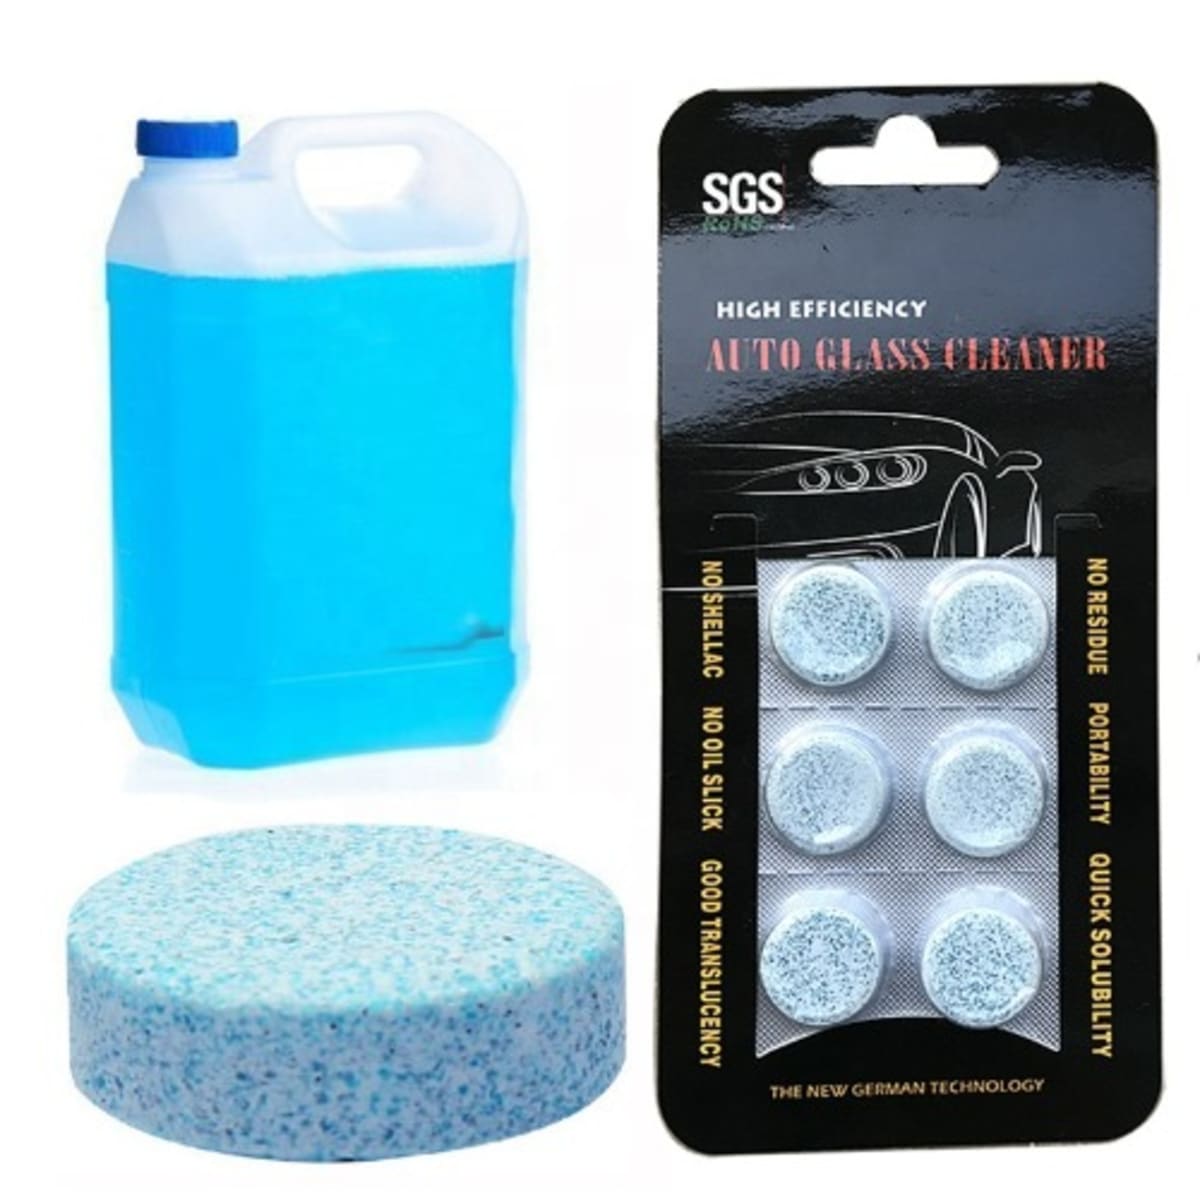 SGS Auto Glass Cleaner Tablet - 6pc